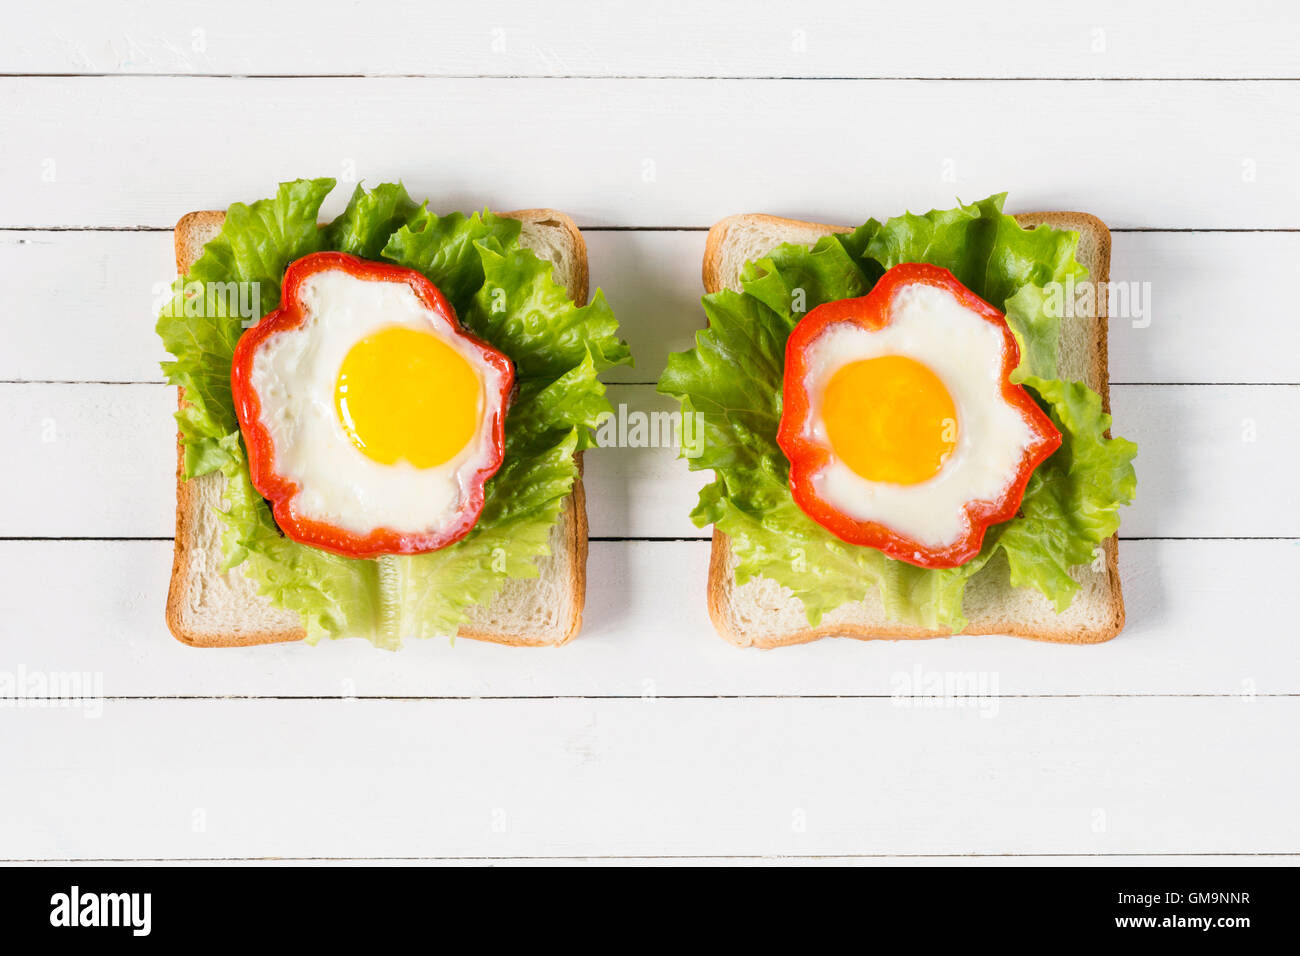 Breakfast sandwich with egg, cheese and green salad. Top view healthy food. Creative food ideas Stock Photo